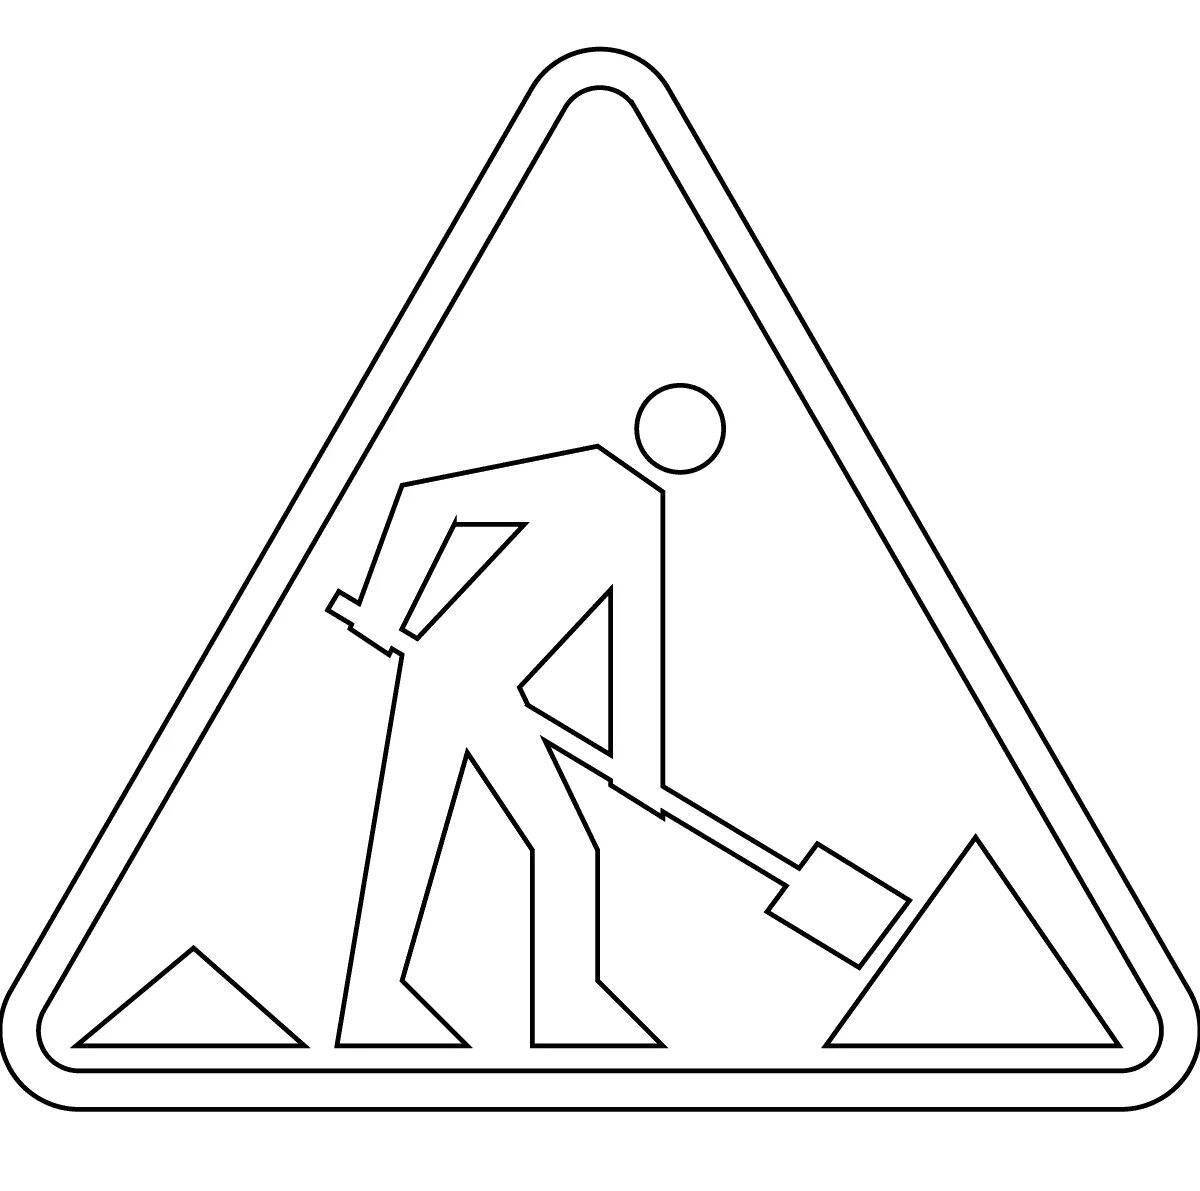 Coloring book exciting warning sign